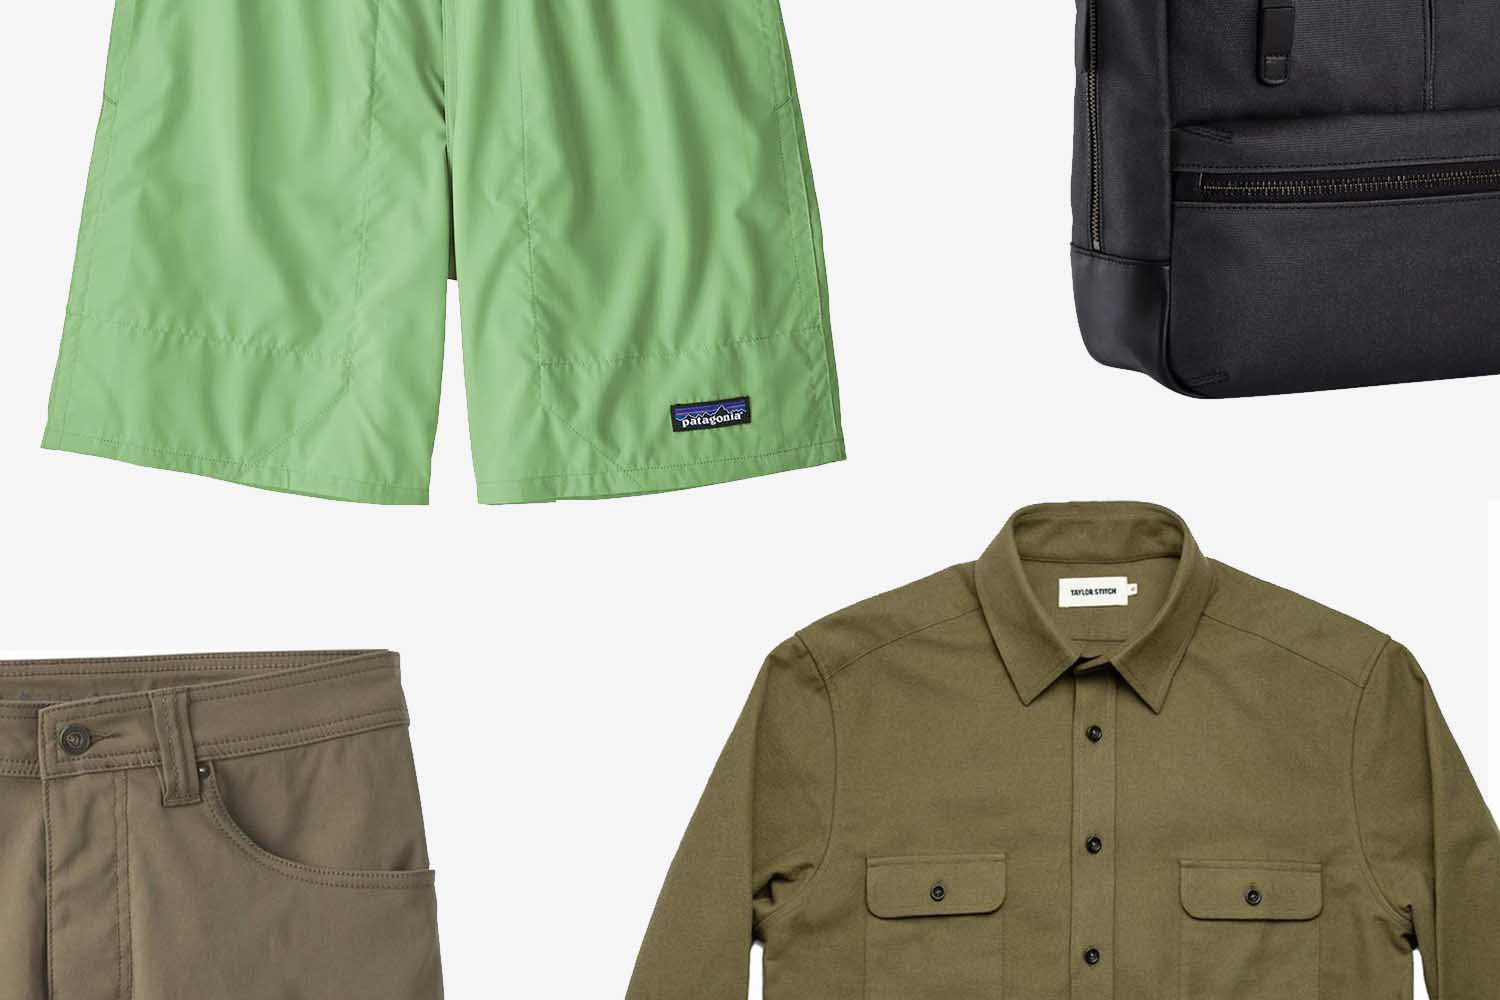 Save Up to 50% During Backcountry's Semi-Annual Sale